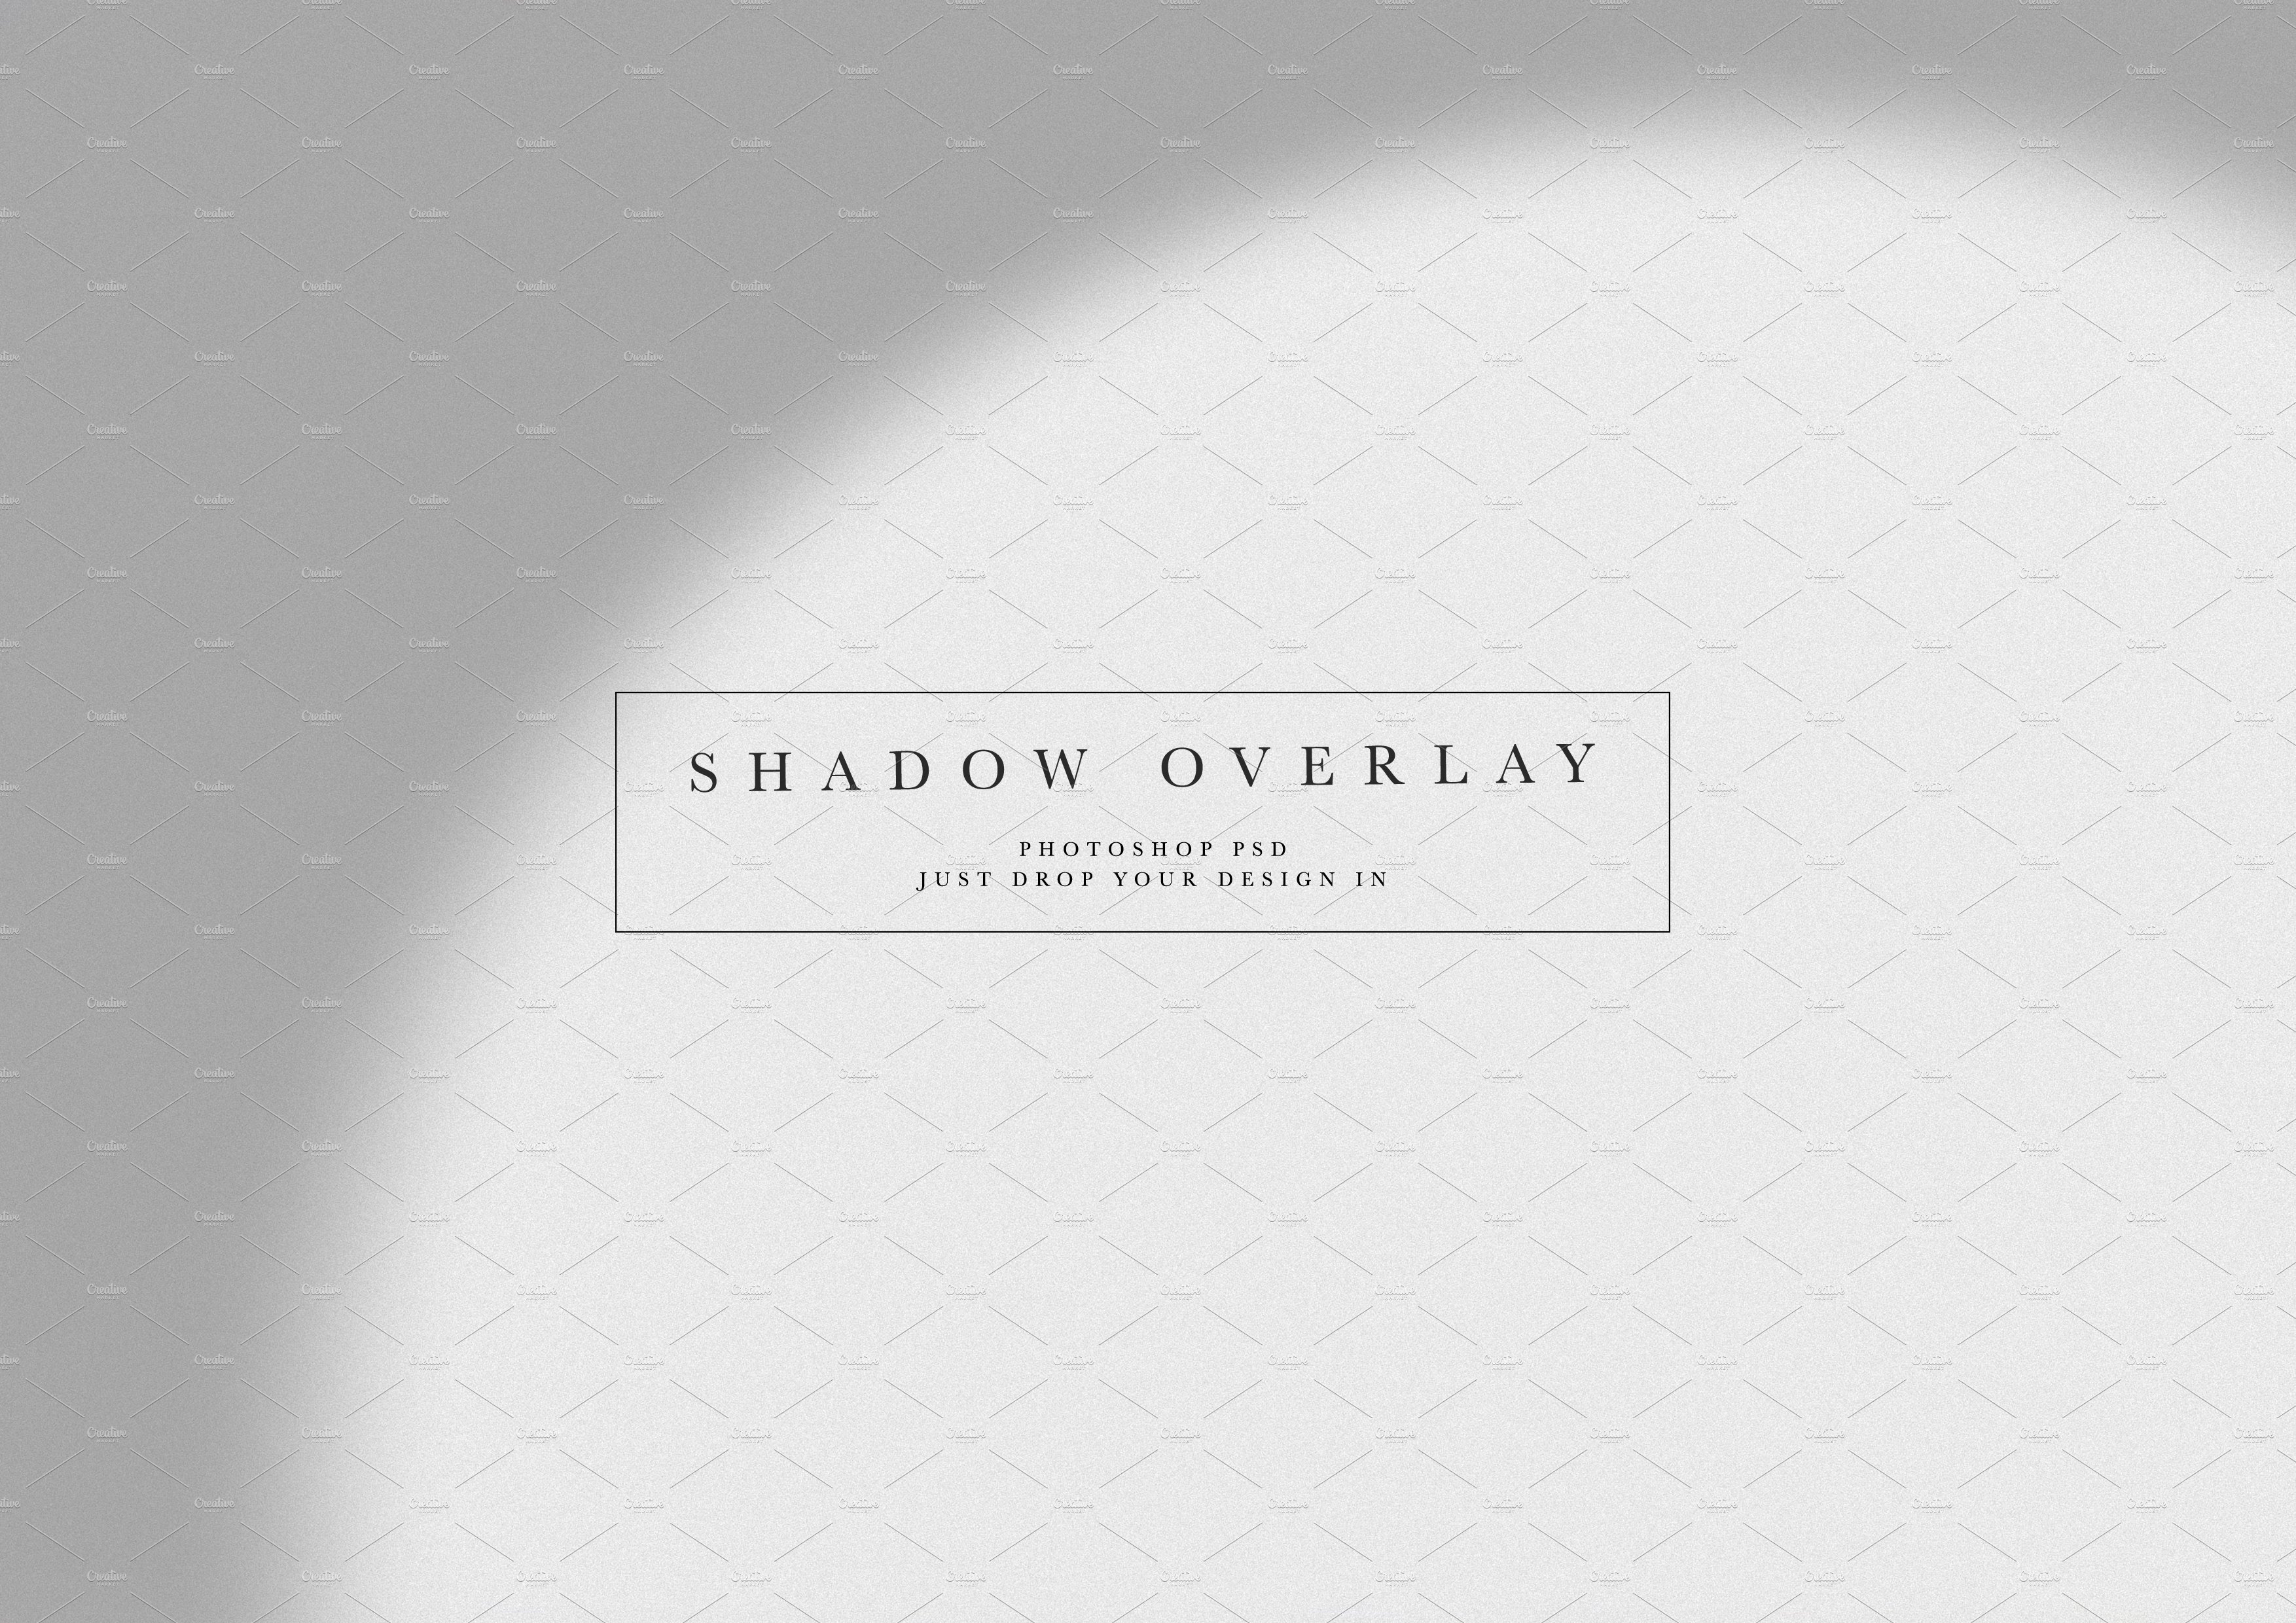 Shadow Overlay #83cover image.